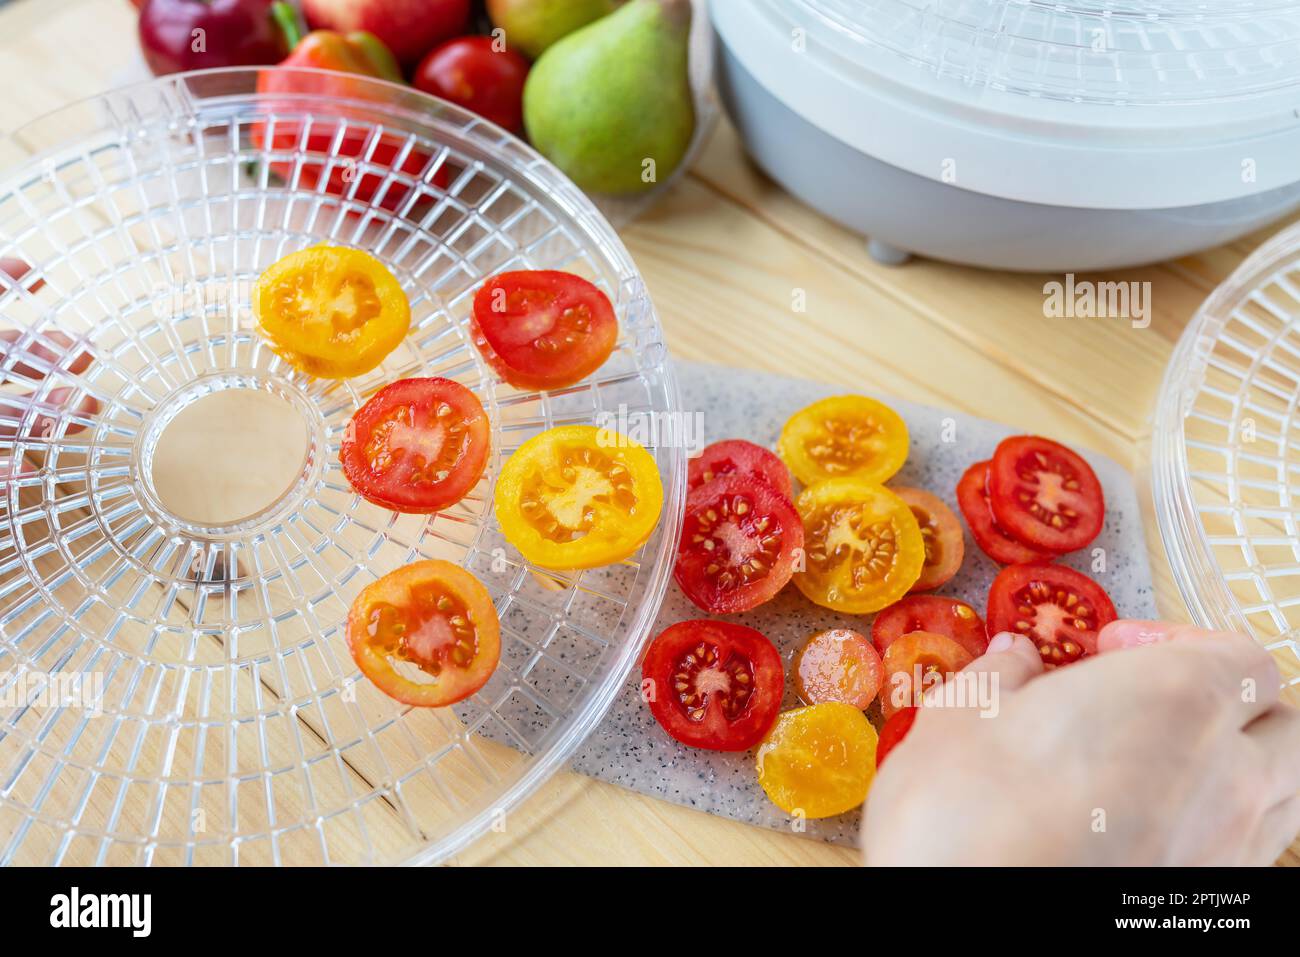 https://c8.alamy.com/comp/2PTJWAP/electric-drying-machine-for-dehydrating-products-with-horizontal-loading-of-pallets-top-view-girl-lays-sliced-tomatoes-close-up-natural-light-2PTJWAP.jpg